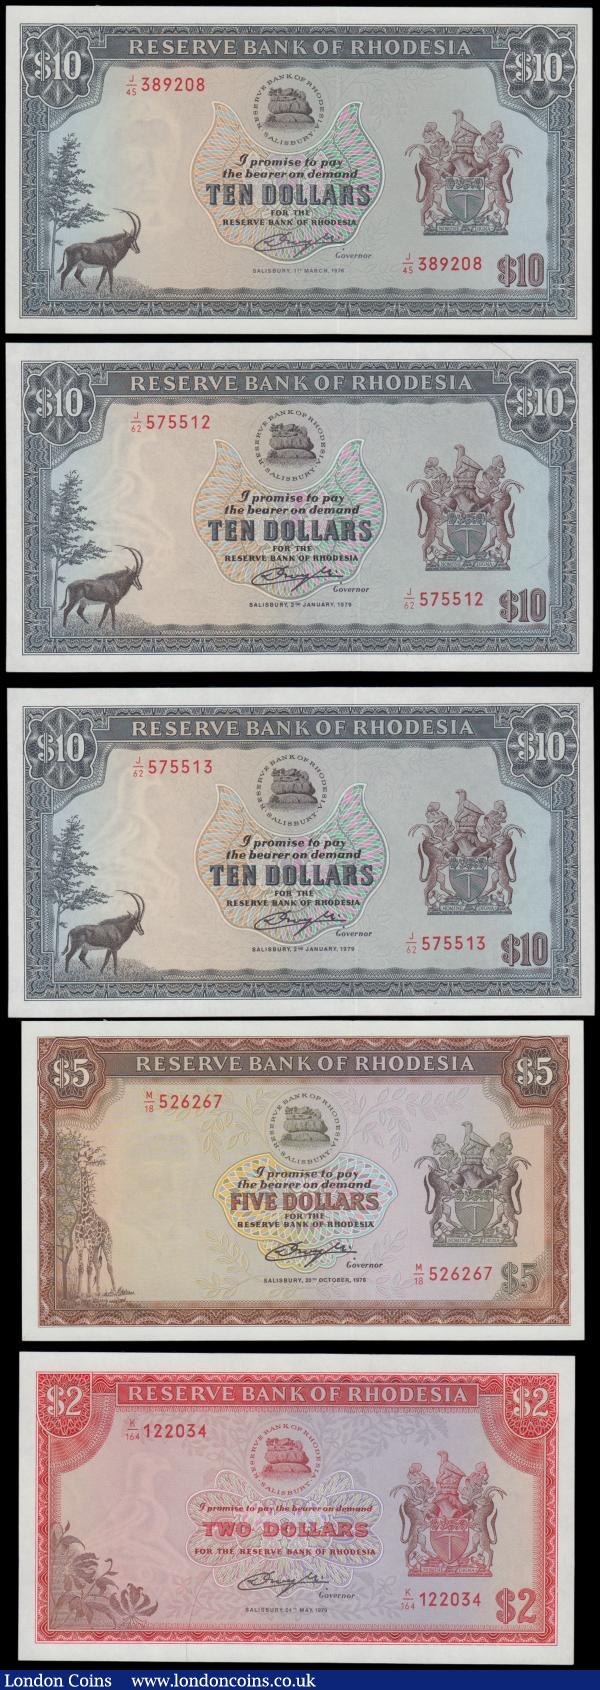 Rhodesia Reserve Bank (5), 10 Dollars (3) dated 1979 & 1976 including a pair of consecutively numbered notes series J/62 575512 & J/62 575513, 5 Dollars dated 1978 and 2 Dollars dated 1979, Uncirculated : World Banknotes : Auction 161 : Lot 412